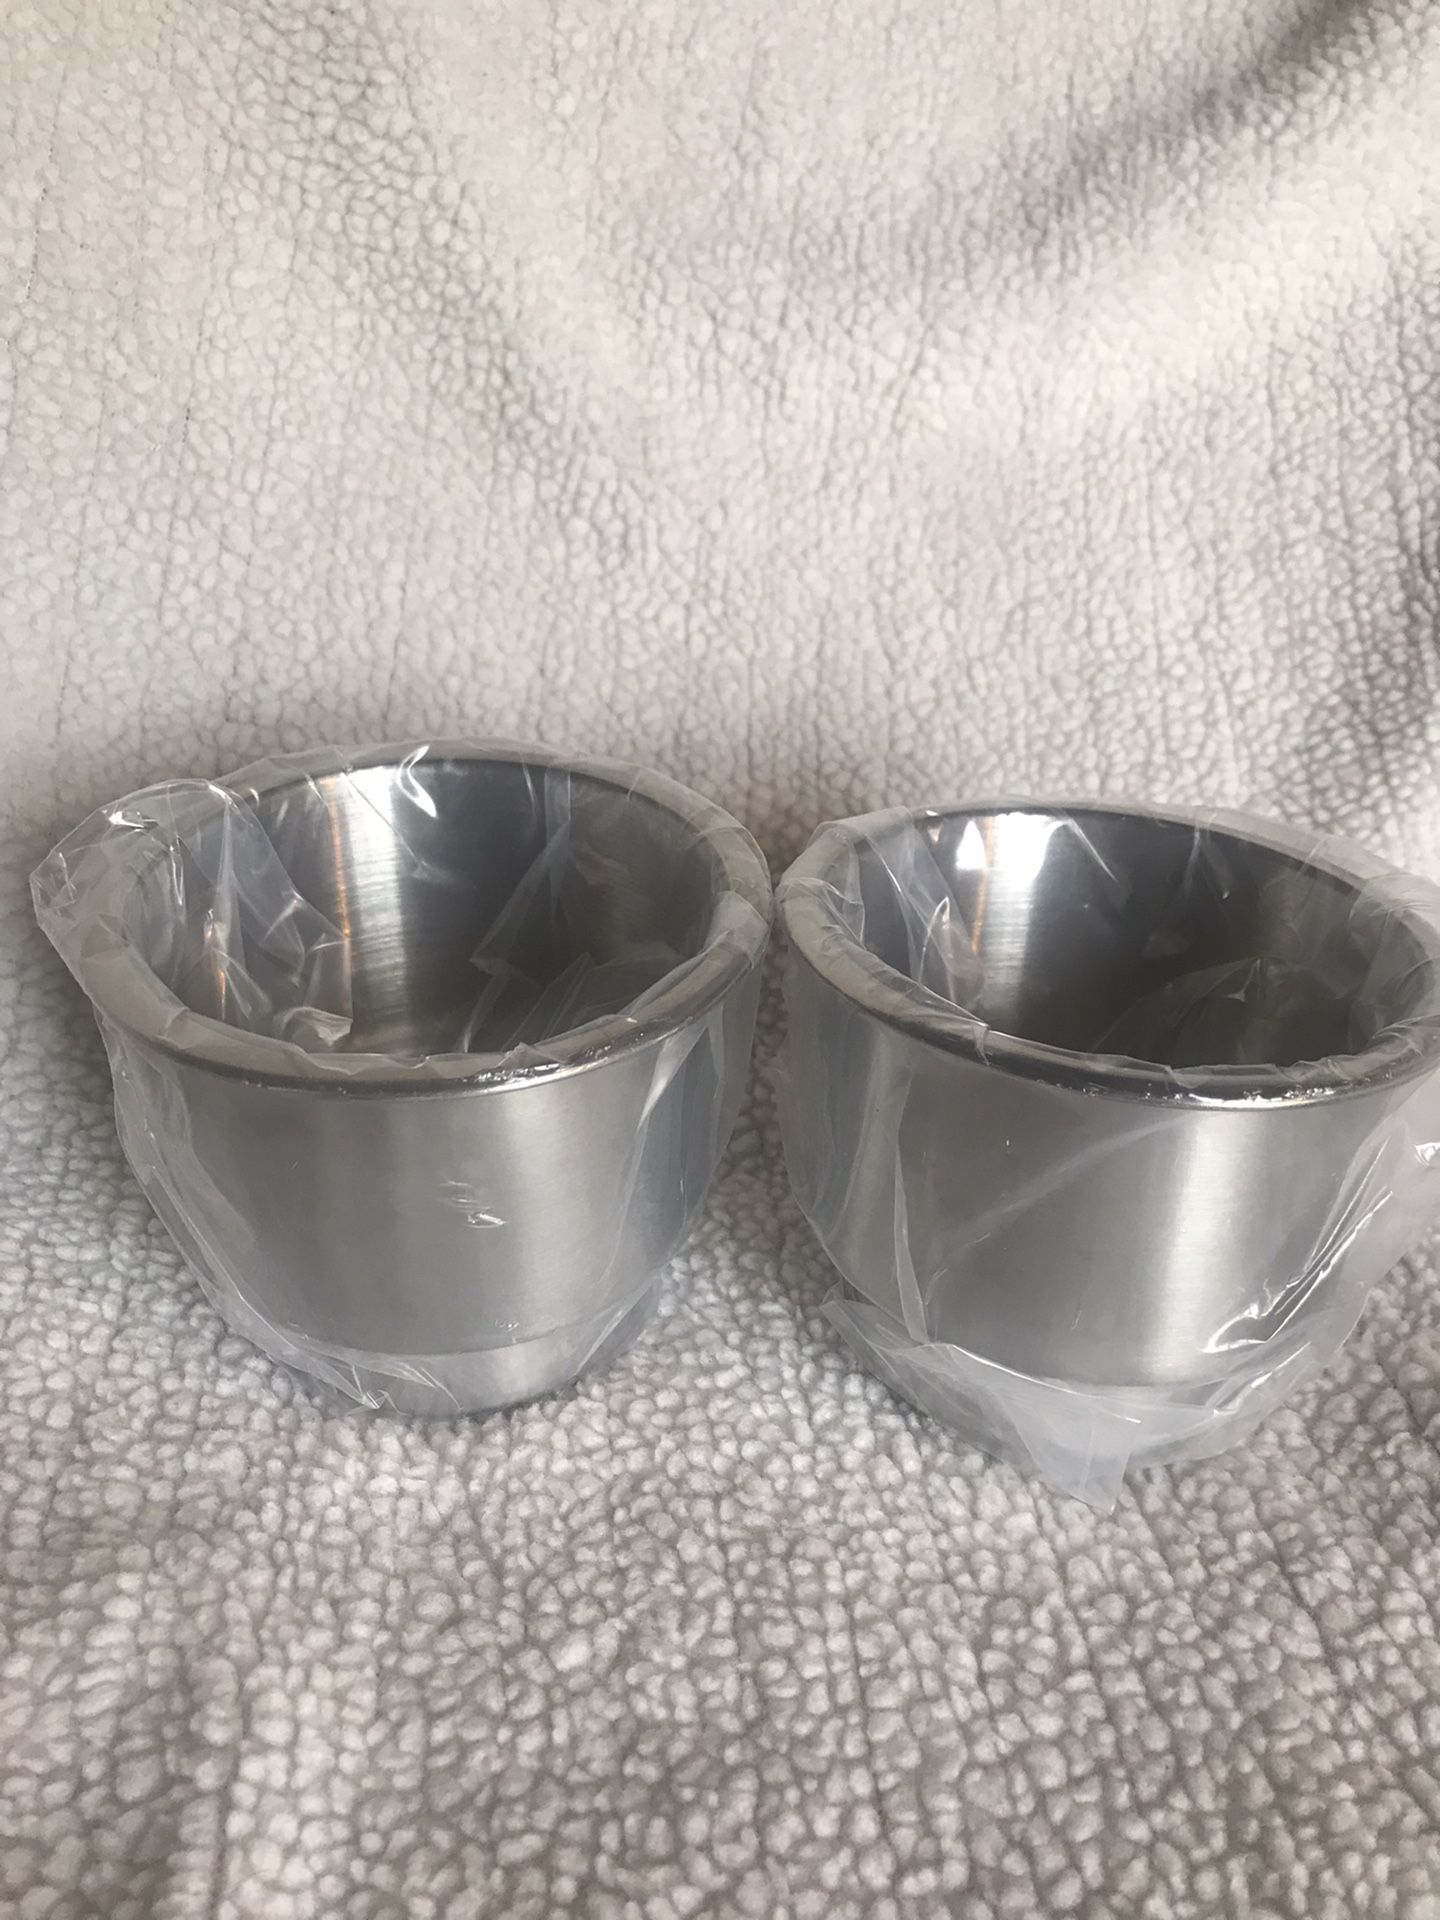 2 X Stainless Steel Cup Drink Holders w/ Drain Hole